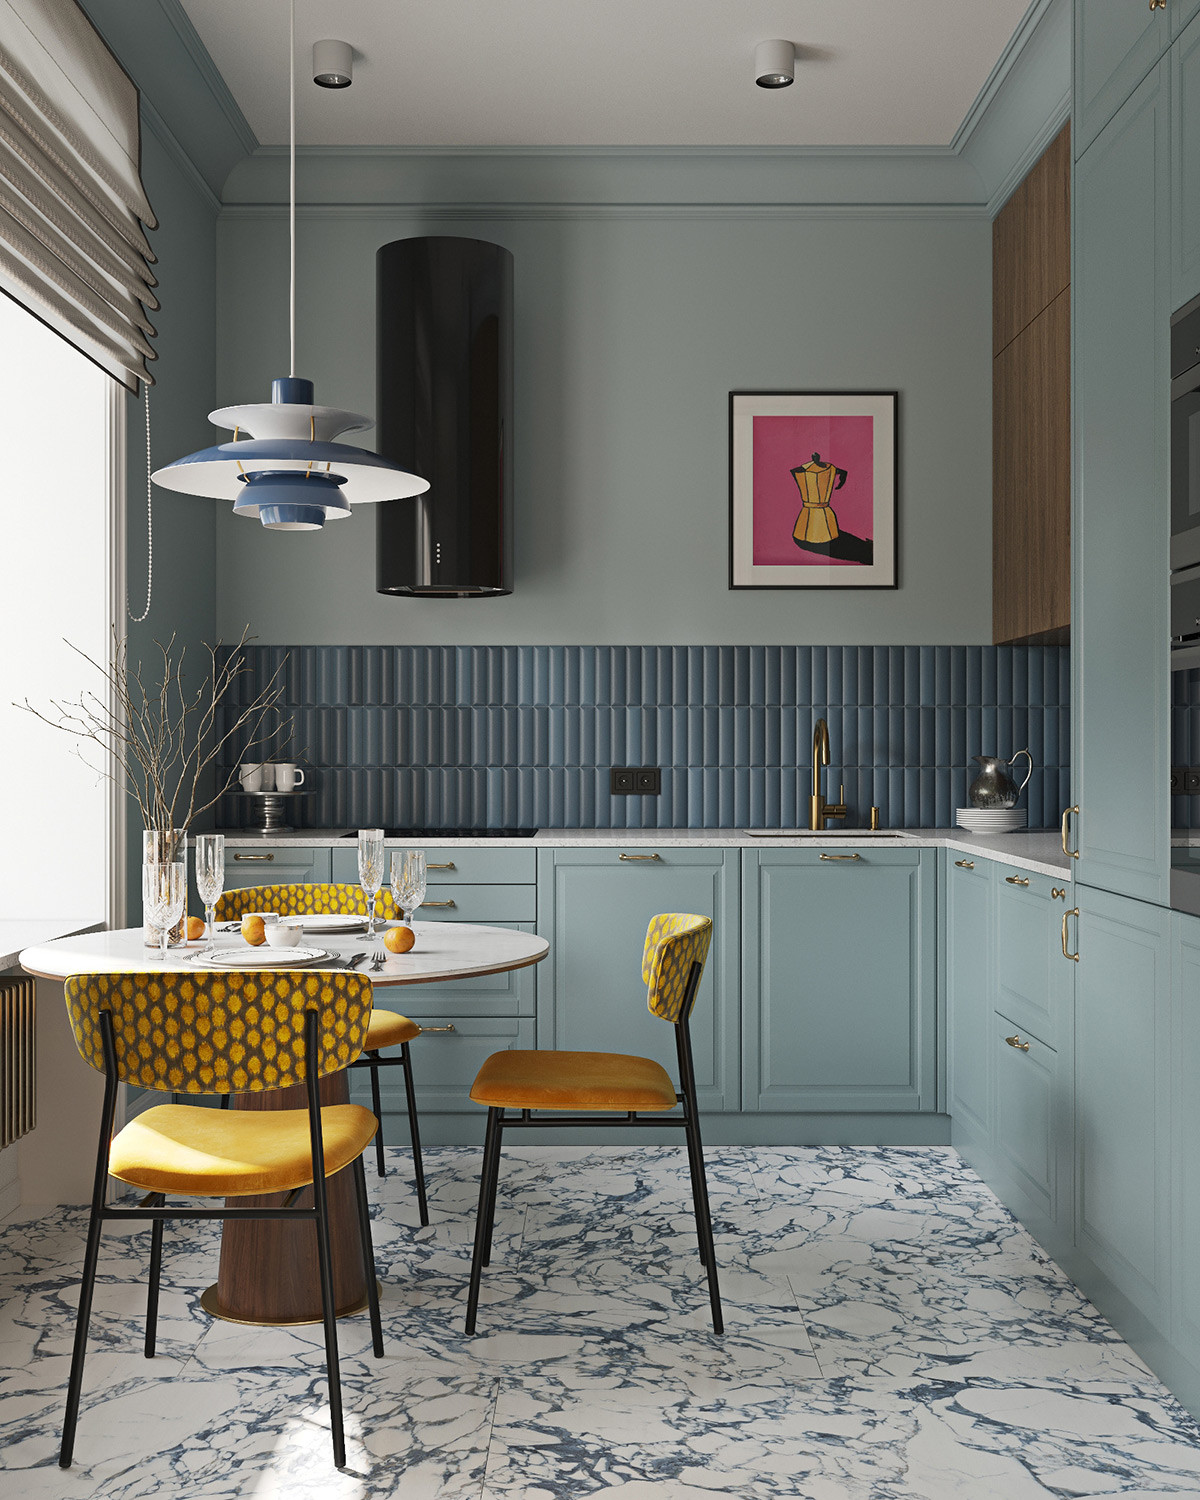 Kitchen Color Ideas That Will Make You Want to Cook Every Meal